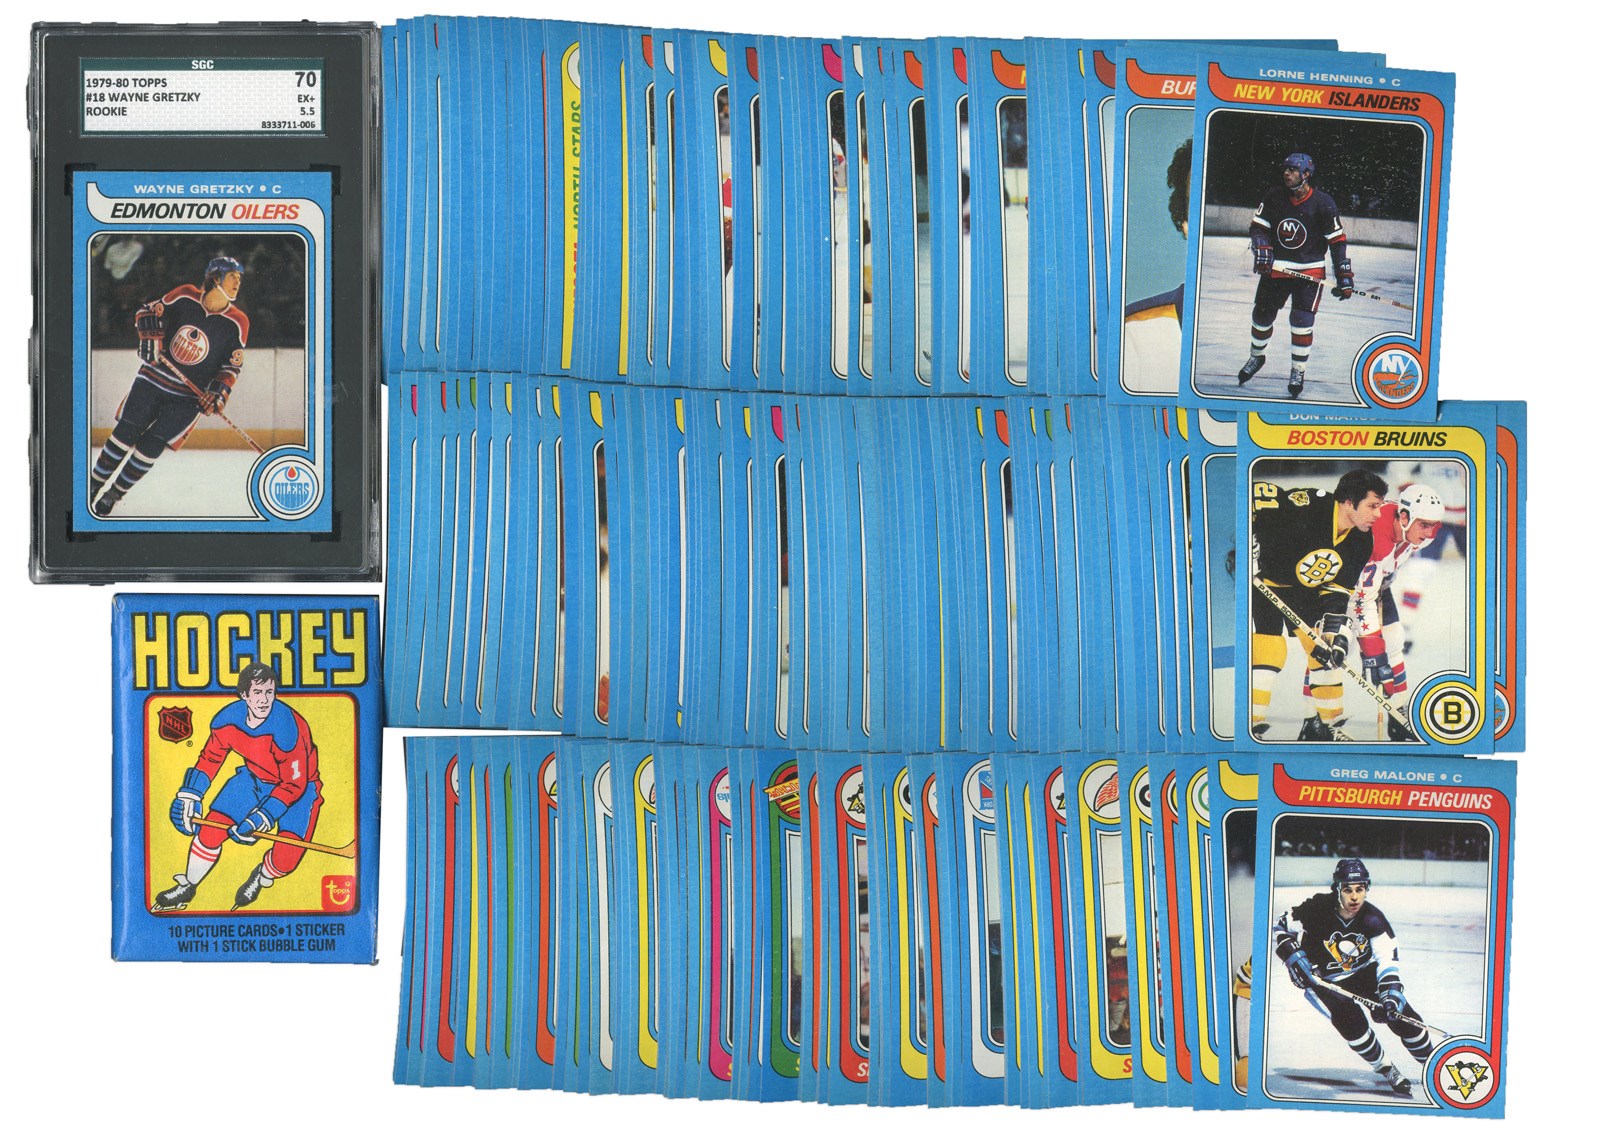 1979 Topps Hockey Complete Set with Sealed Pack & SGC 70 Gretzky Rookie